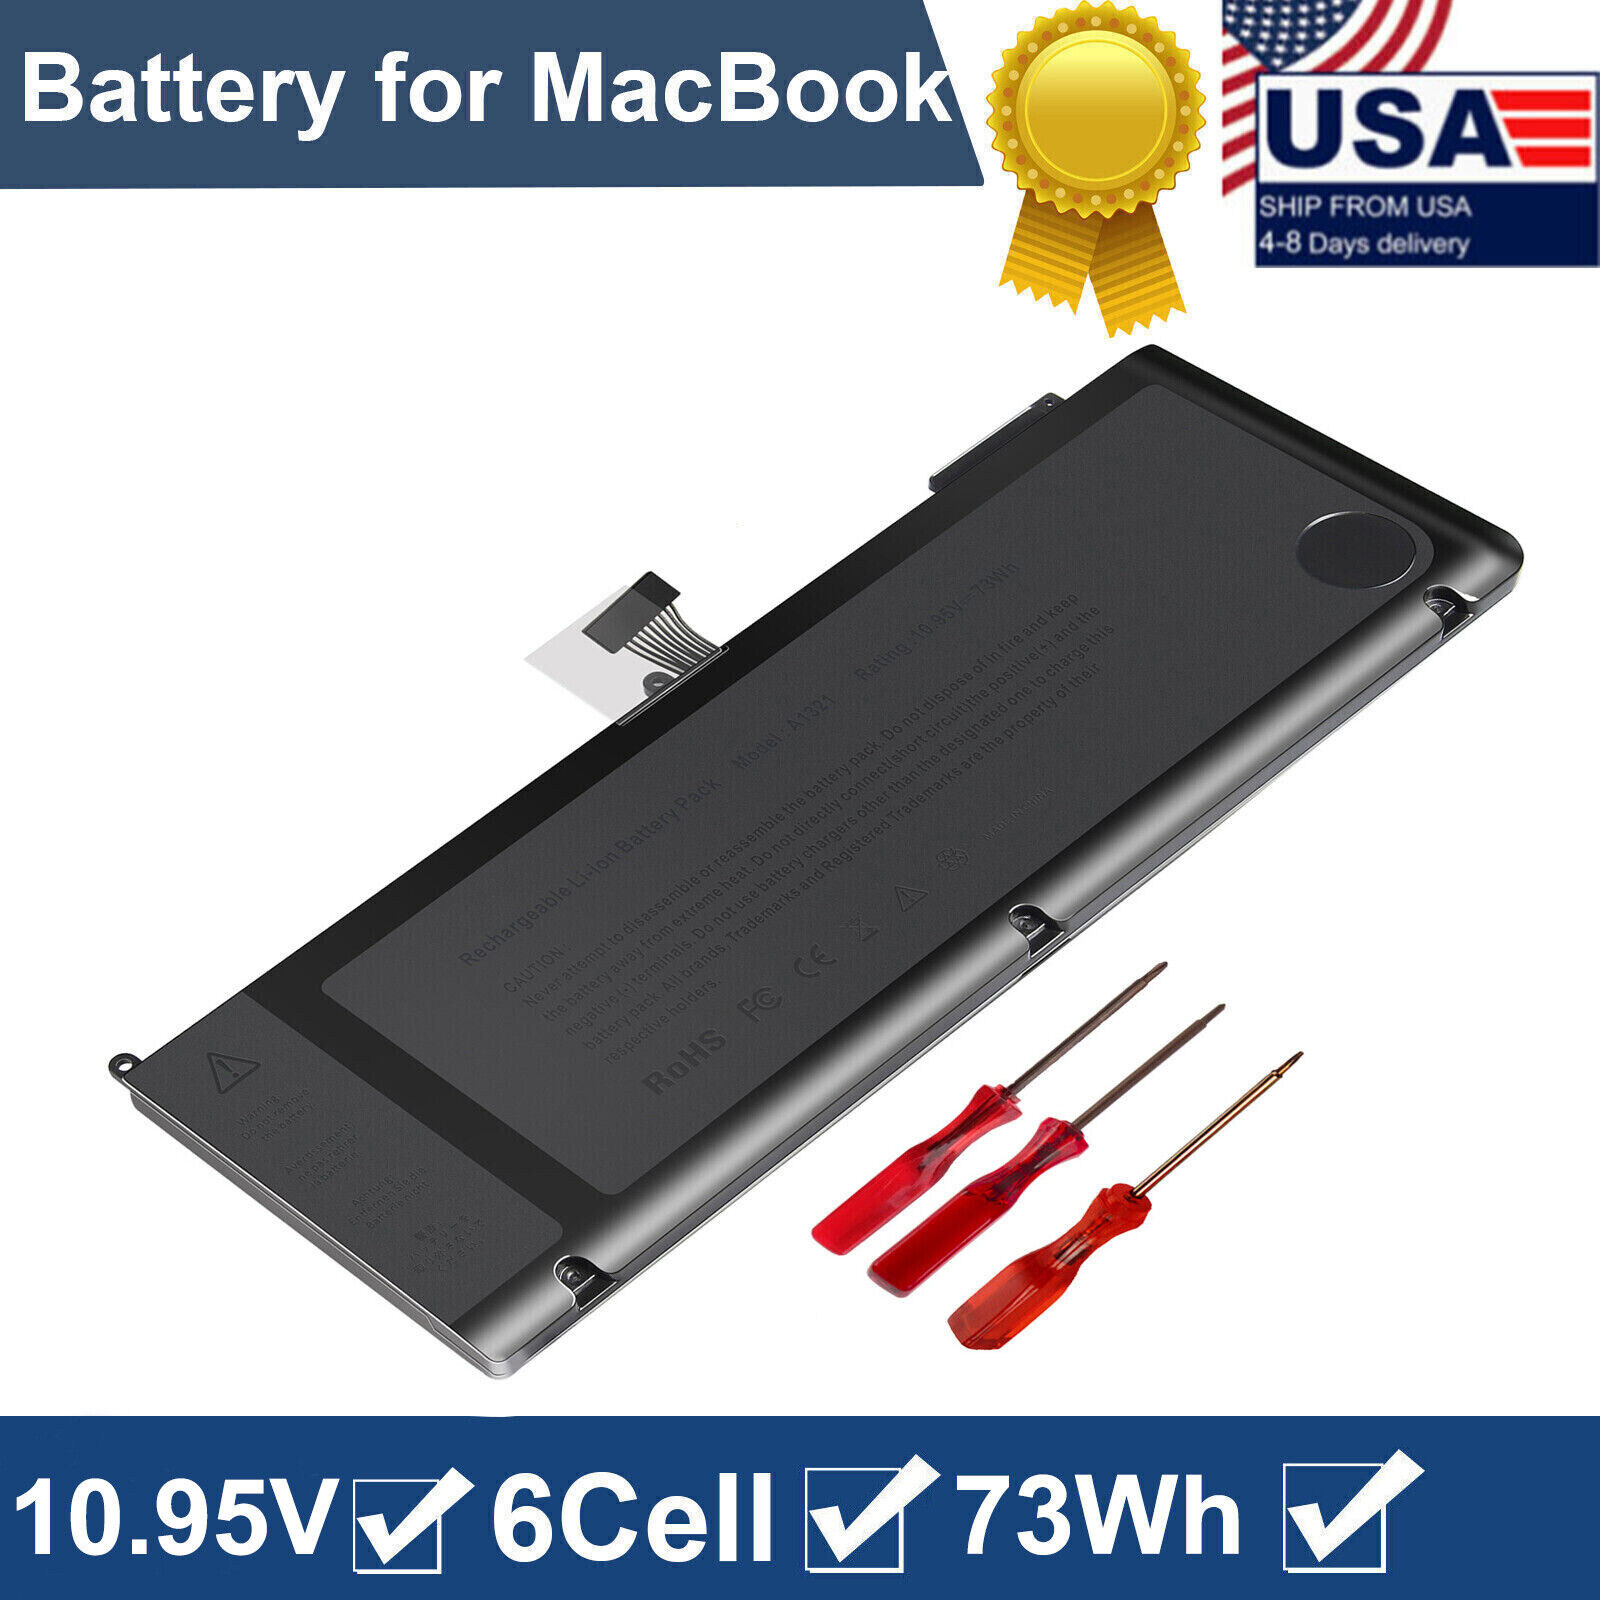 A1321 Laptop Battery for Apple Macbook Pro 15 inch A1286 Mid 2009 2010 Version